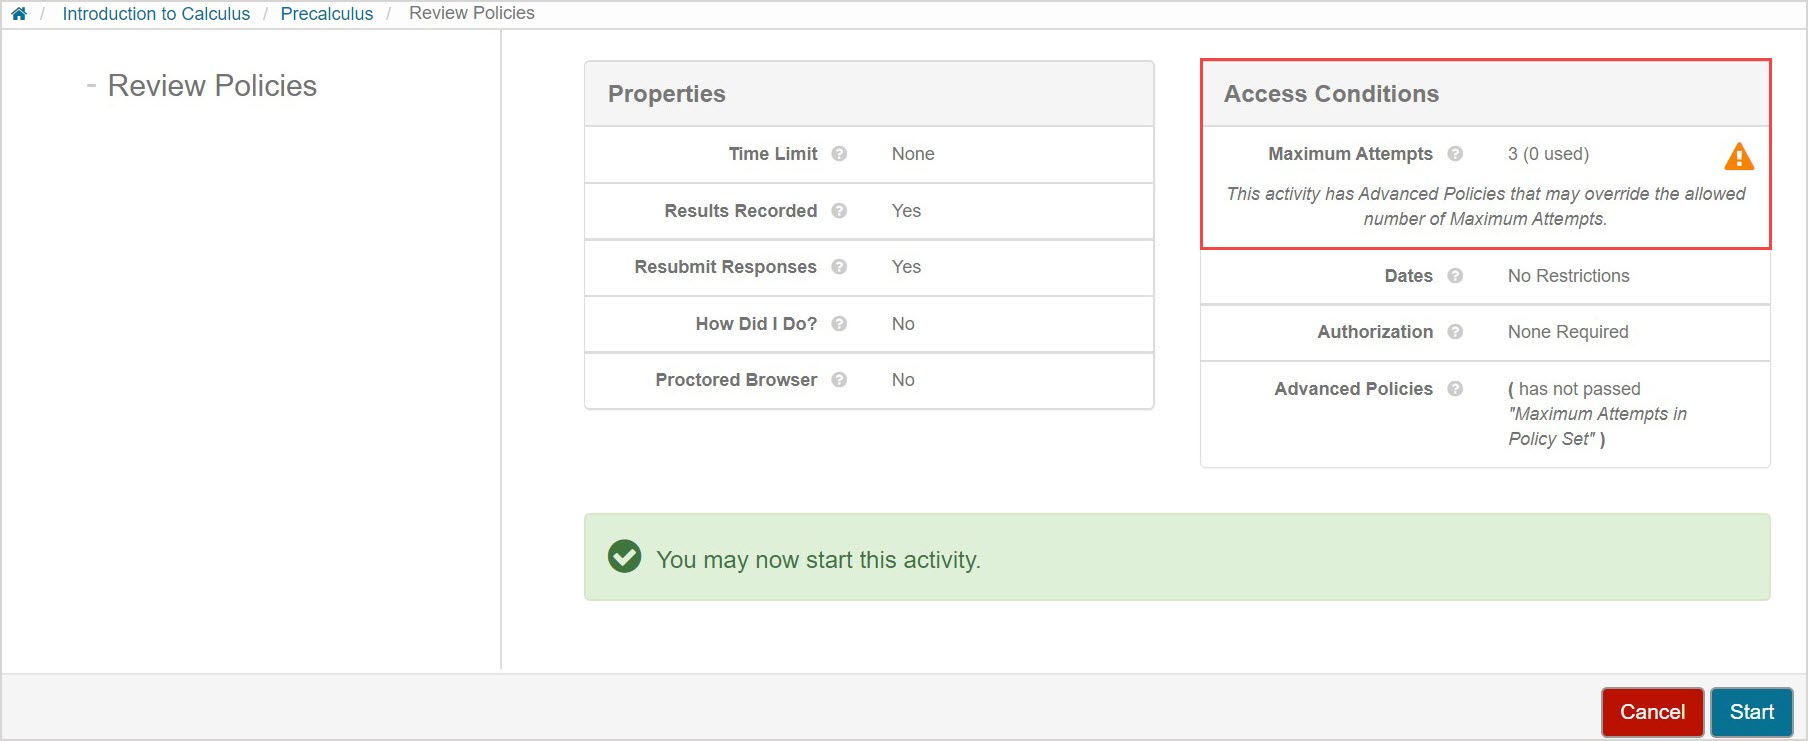 Advanced Policies are shown in the Access Conditions table of the launch page.